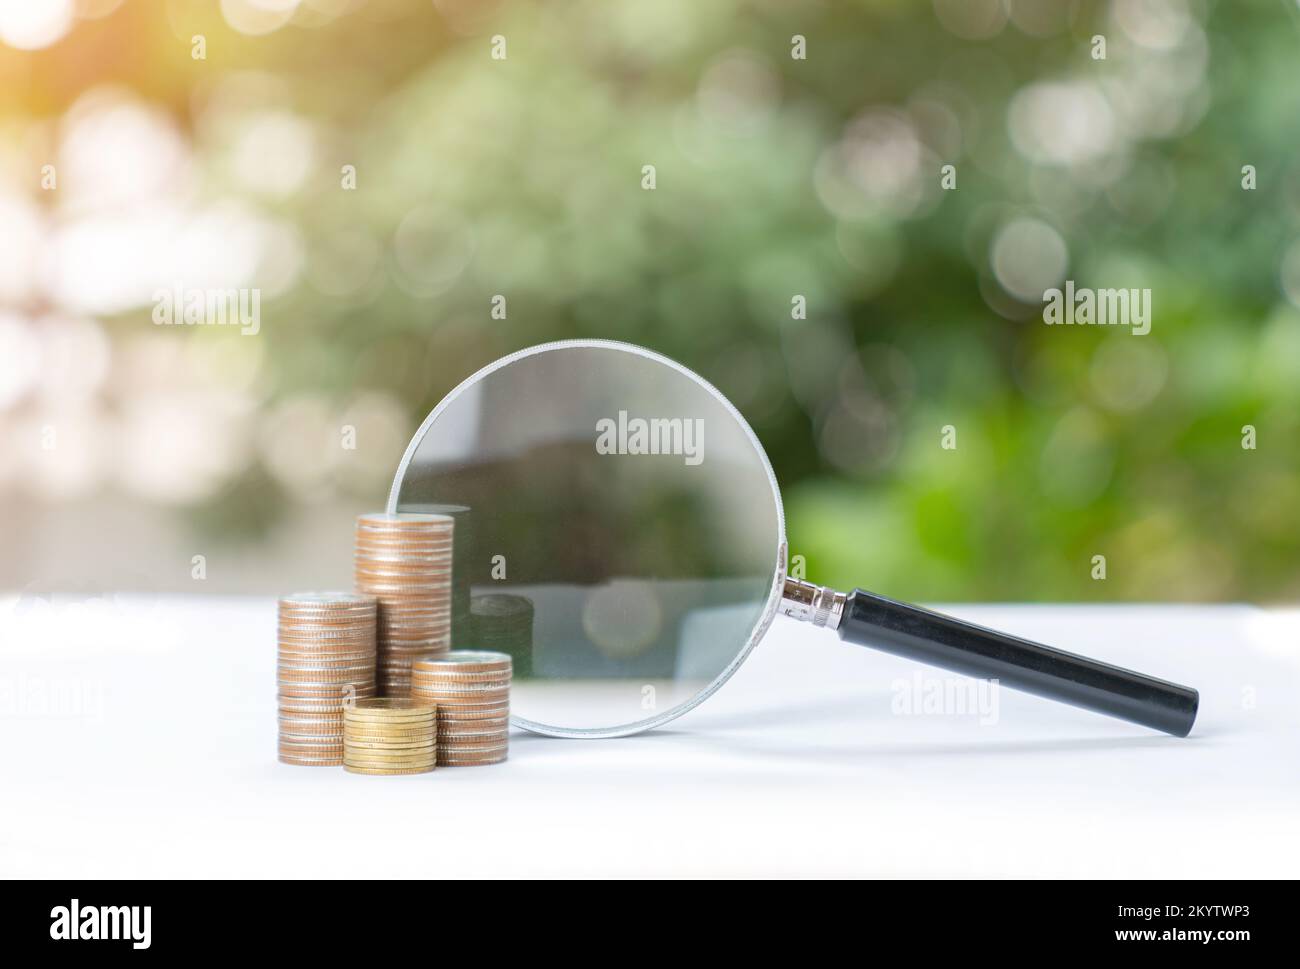 Magnifying glass and coins at the background, Stock image